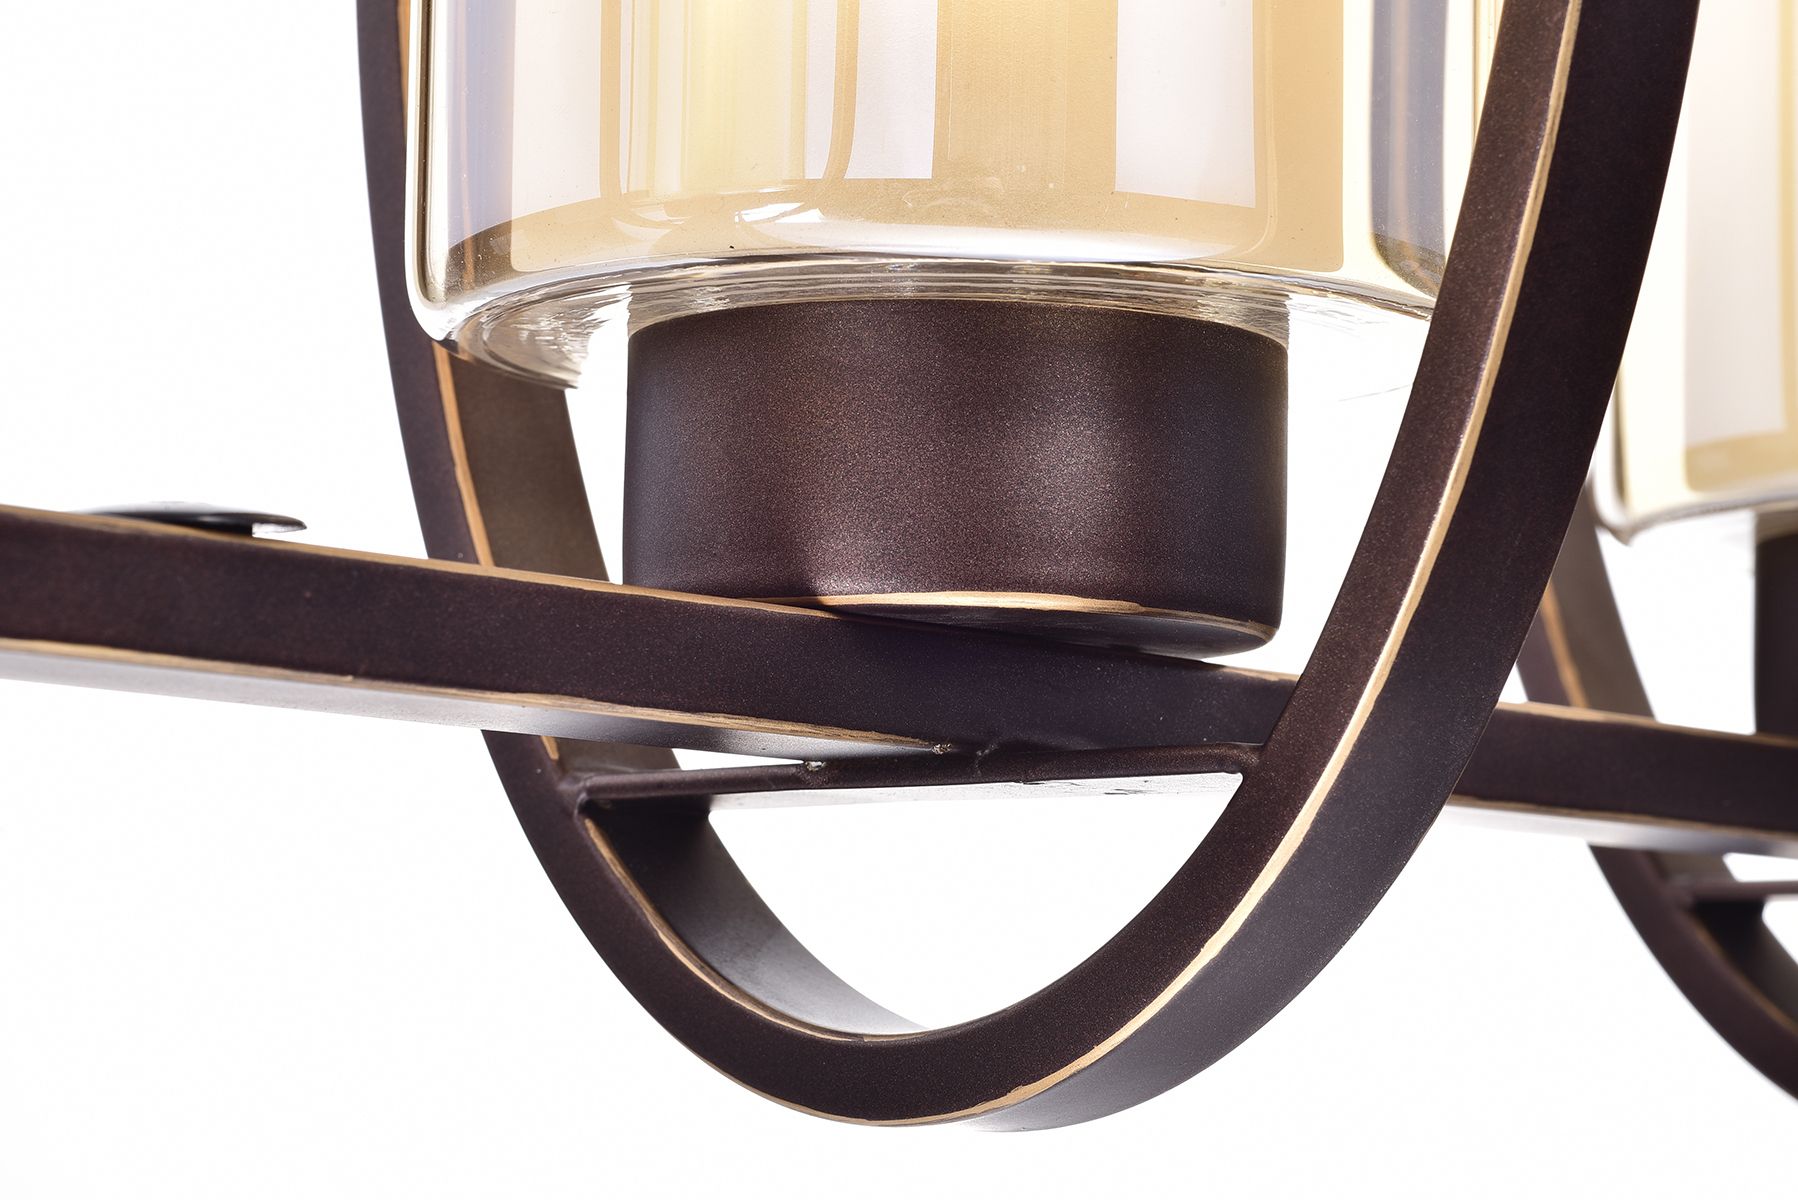 2020 Aveca 4 Light Oil Rubbed Bronze Oval Ceiling Chandelier Intended For Bronze Oval Chandeliers (View 13 of 20)